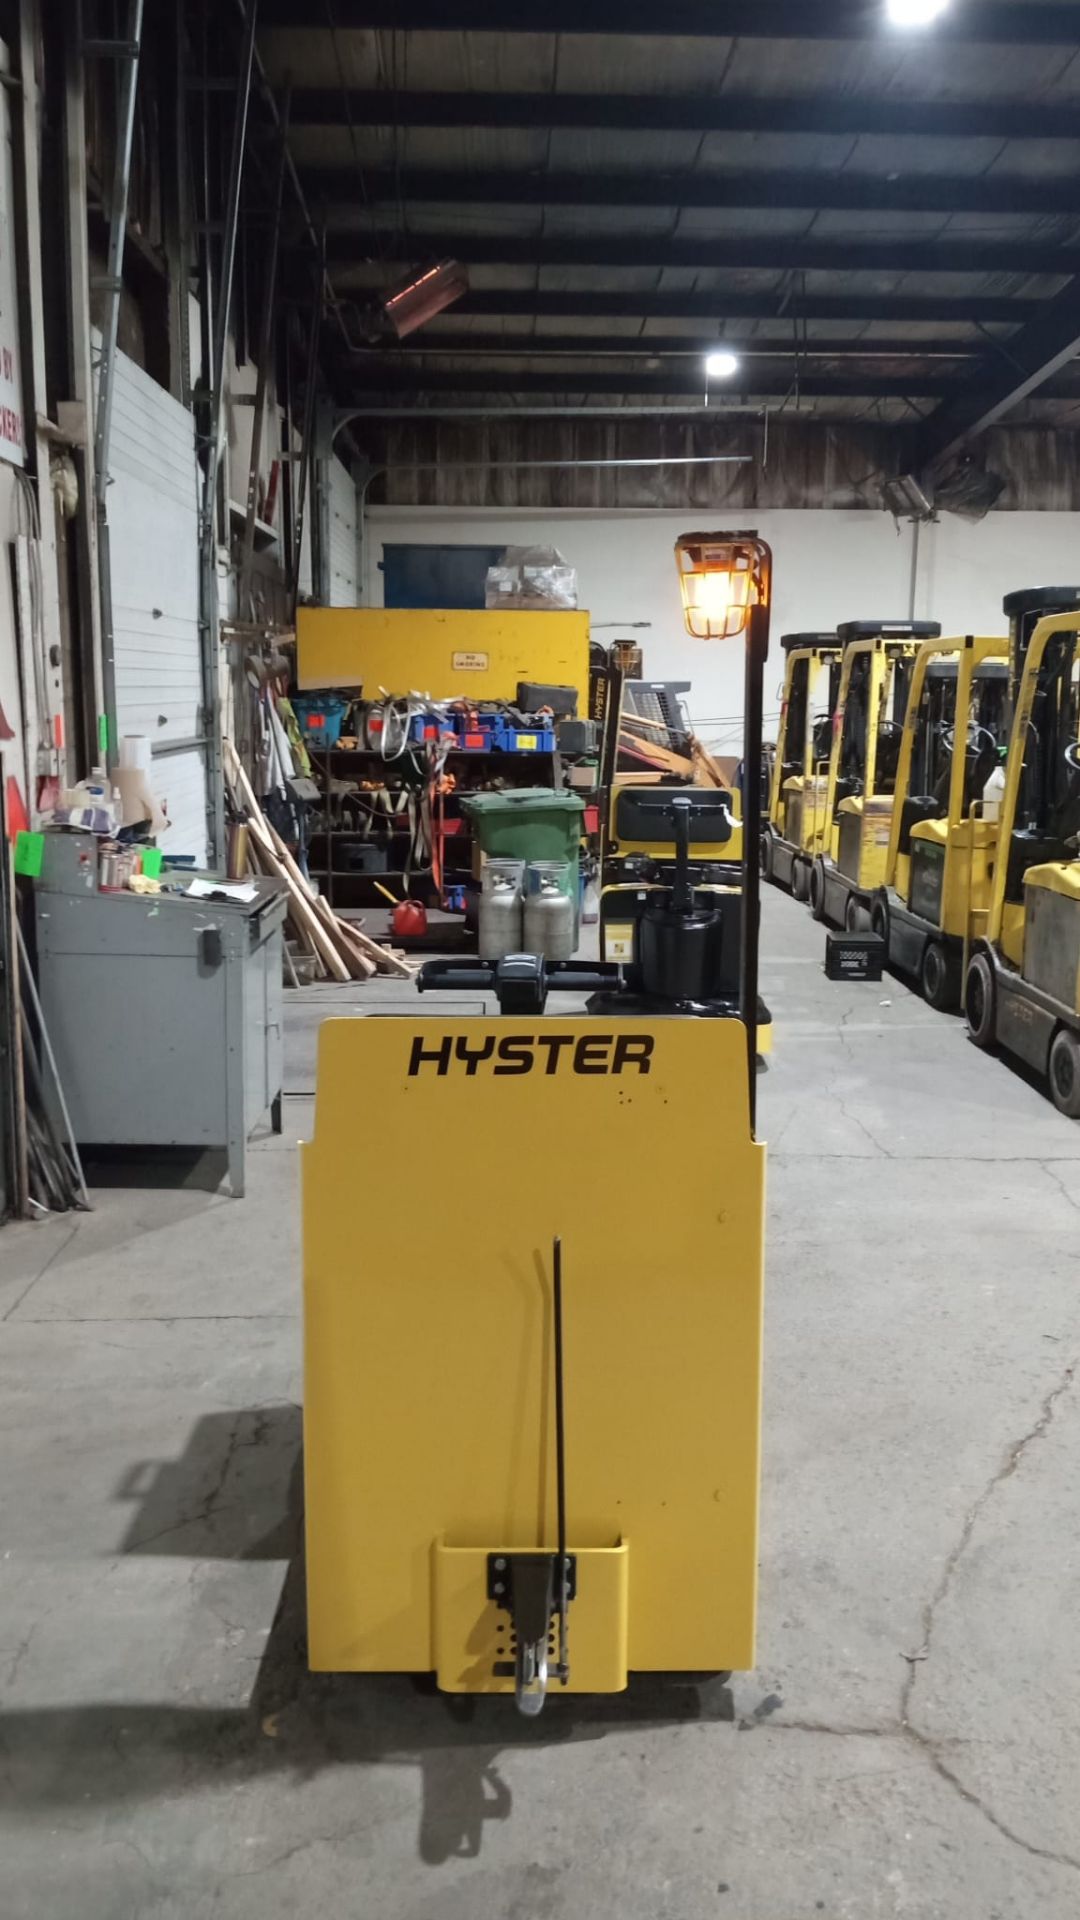 2018 Hyster Ride On Tow Tractor - Tugger / Personal Carrier with 24V Battery Electric Unit - Image 4 of 5